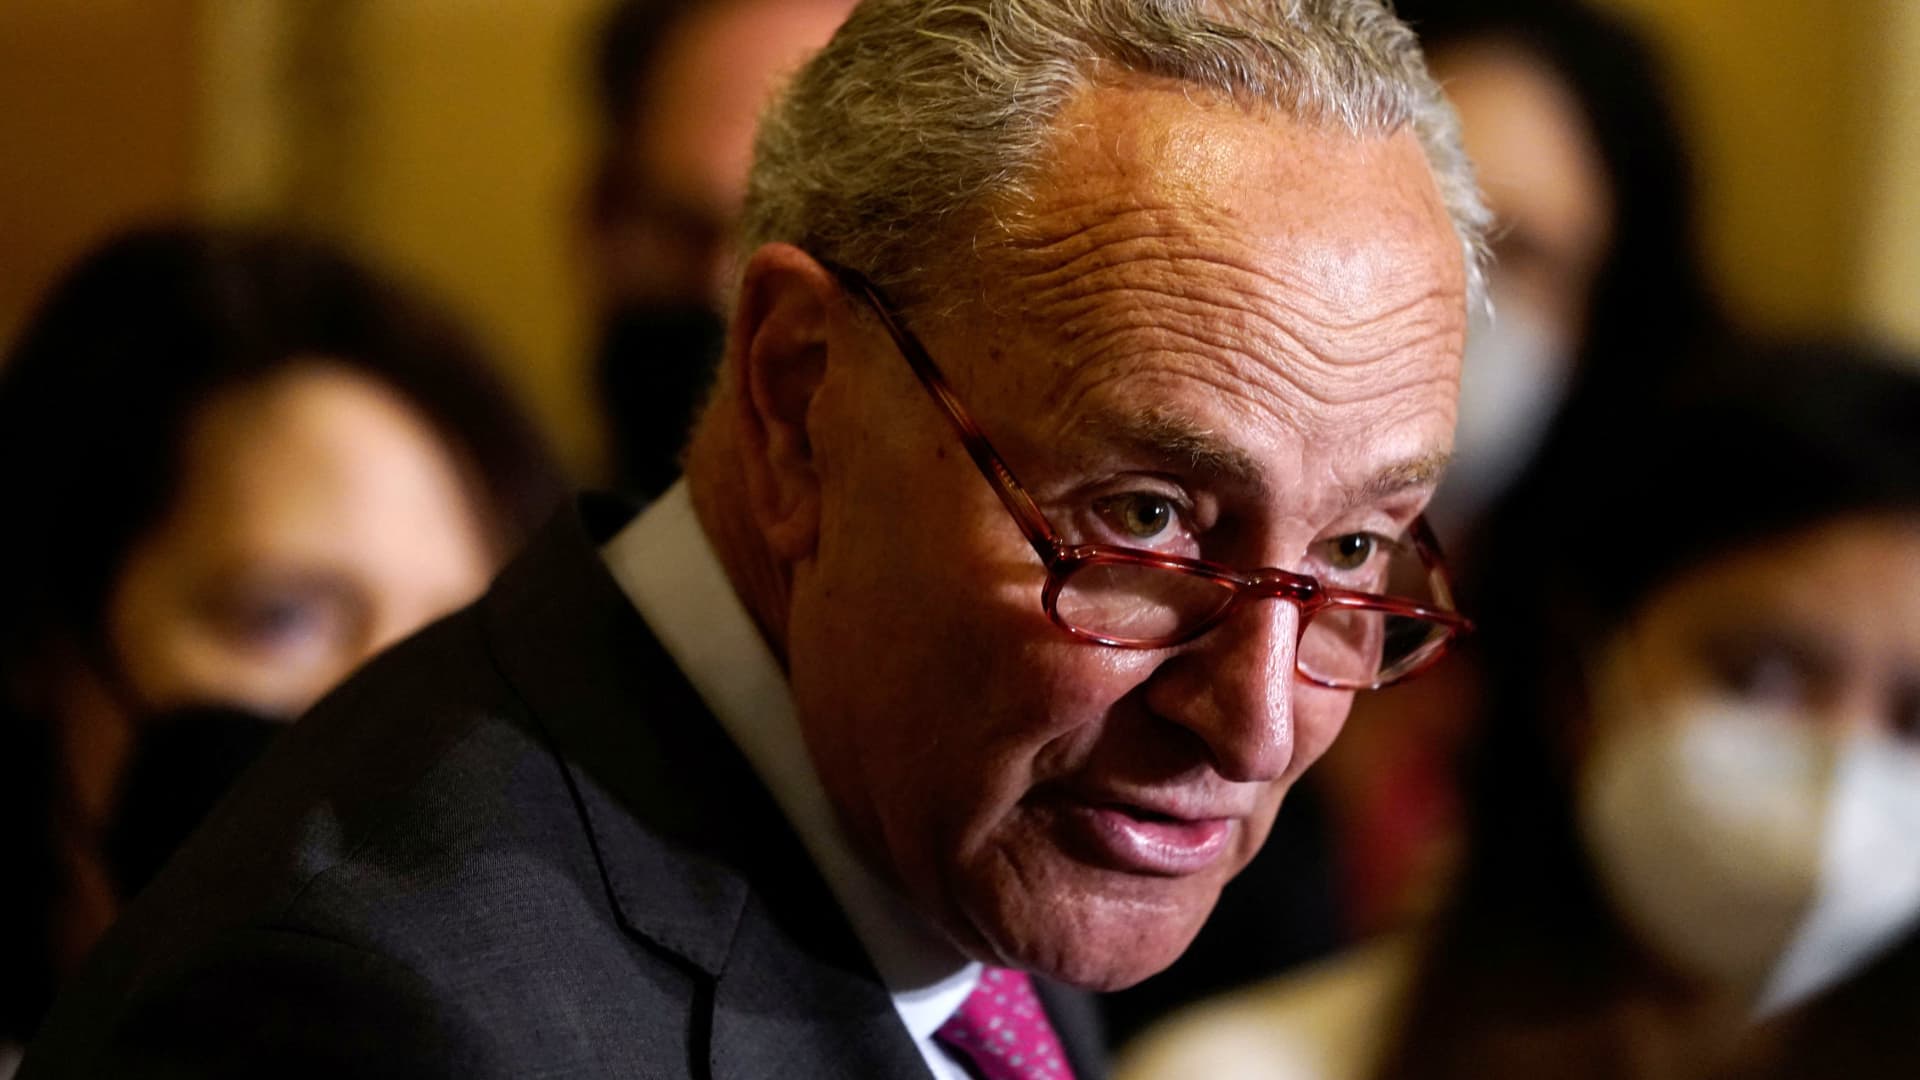 U.S. Senate Majority Leader Chuck Schumer (D-NY) speaks to reporters following the Senate Democrats weekly policy lunch at the U.S. Capitol in Washington, U.S., April 26, 2022.